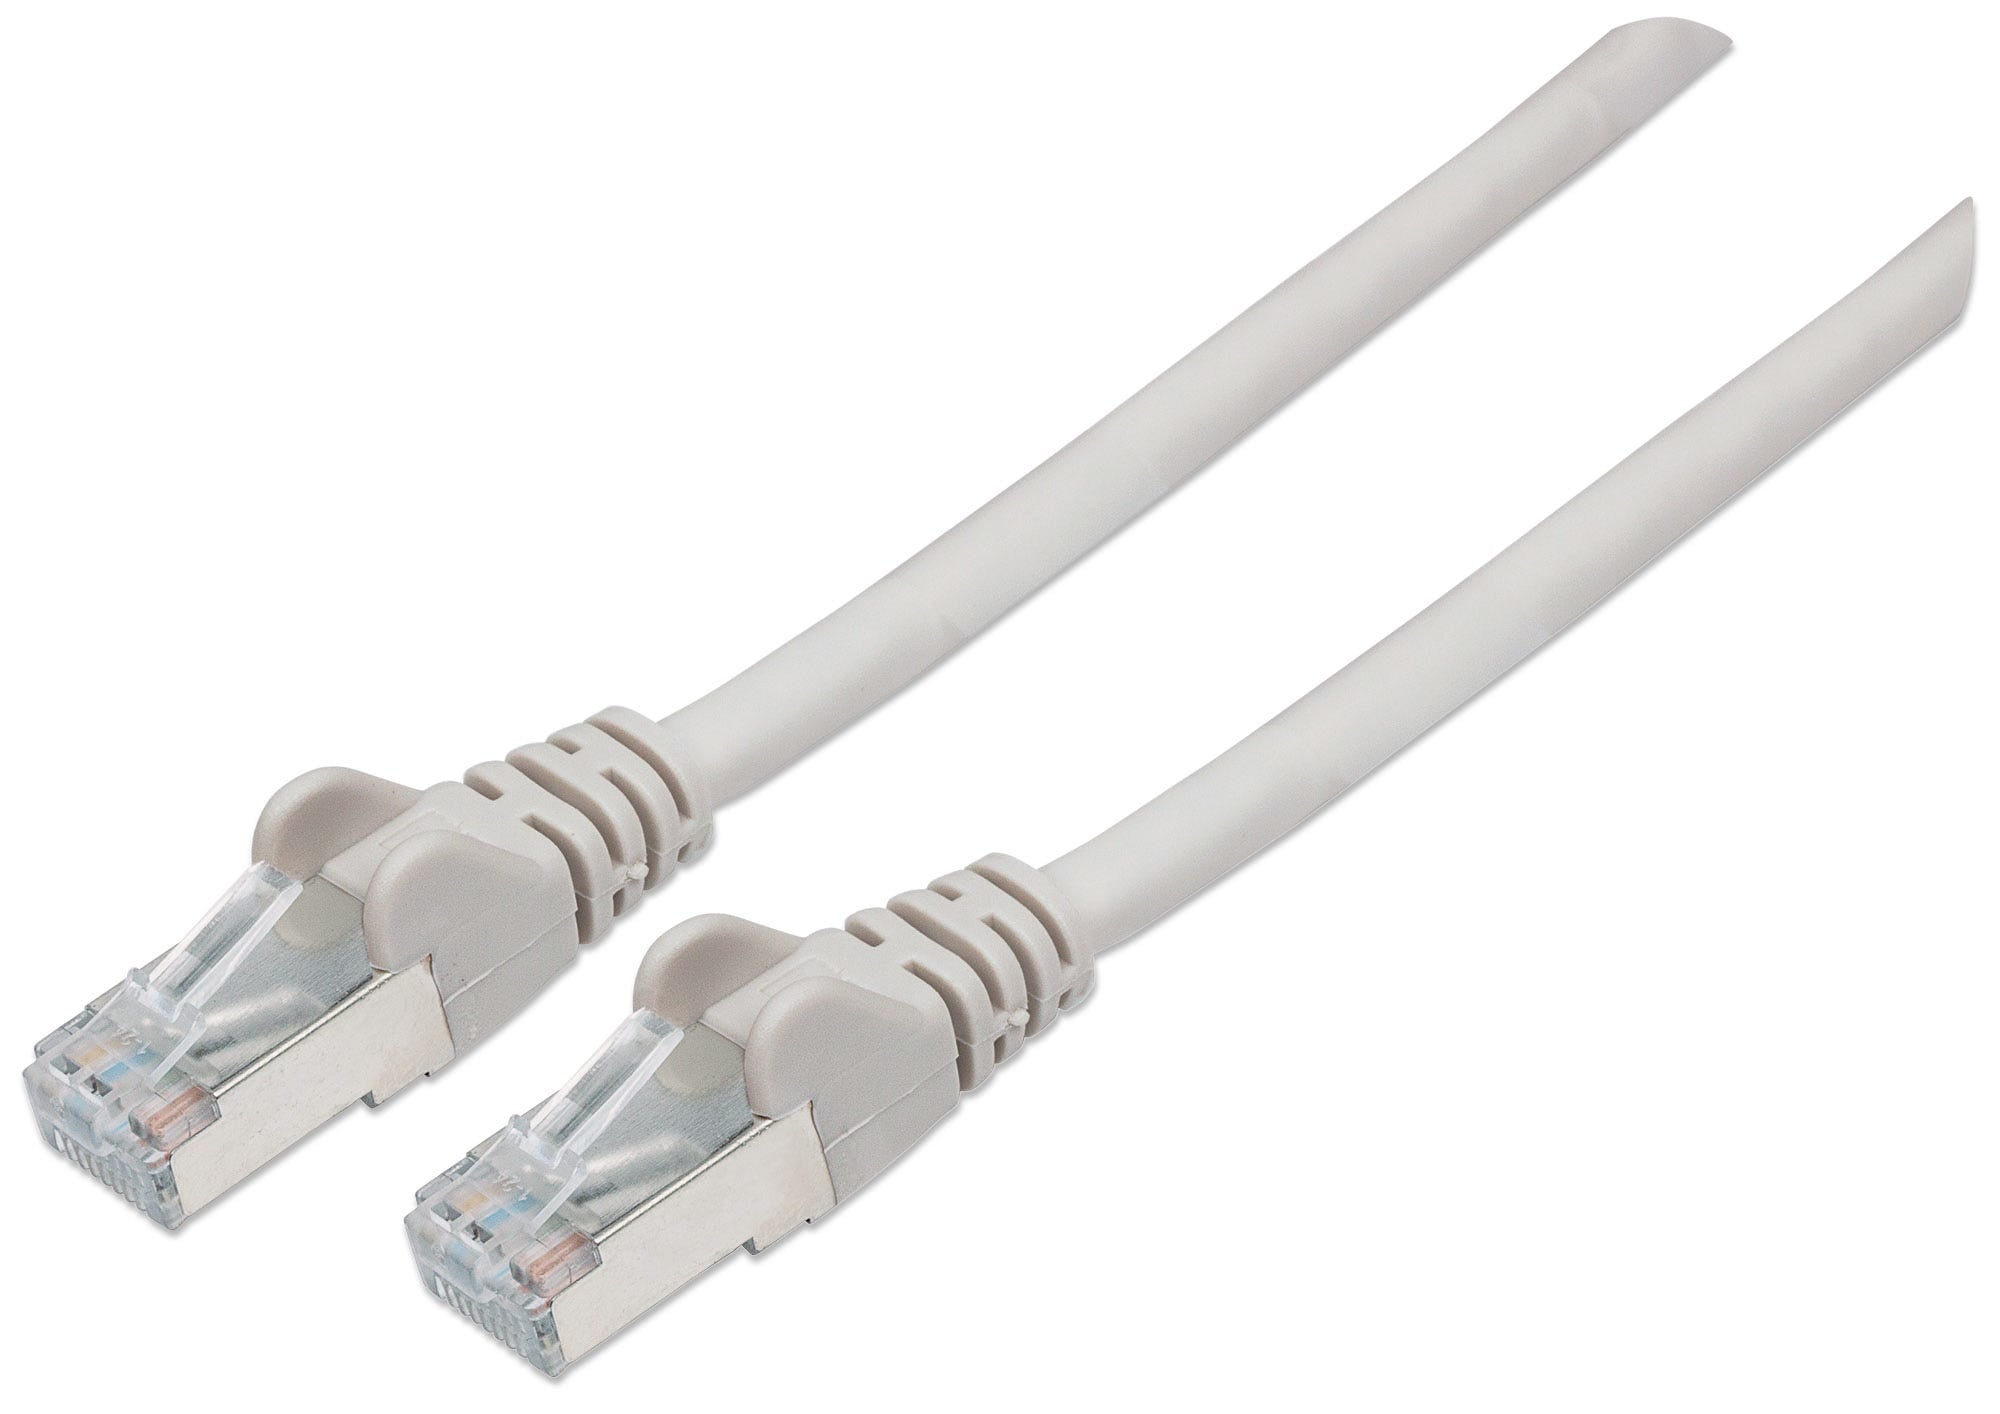 Intellinet Network Patch Cable, Cat6, 3m, Grey, Copper, S/FTP, LSOH / LSZH, PVC, RJ45, Gold Plated Contacts, Snagless, Booted, Lifetime Warranty, Polybag